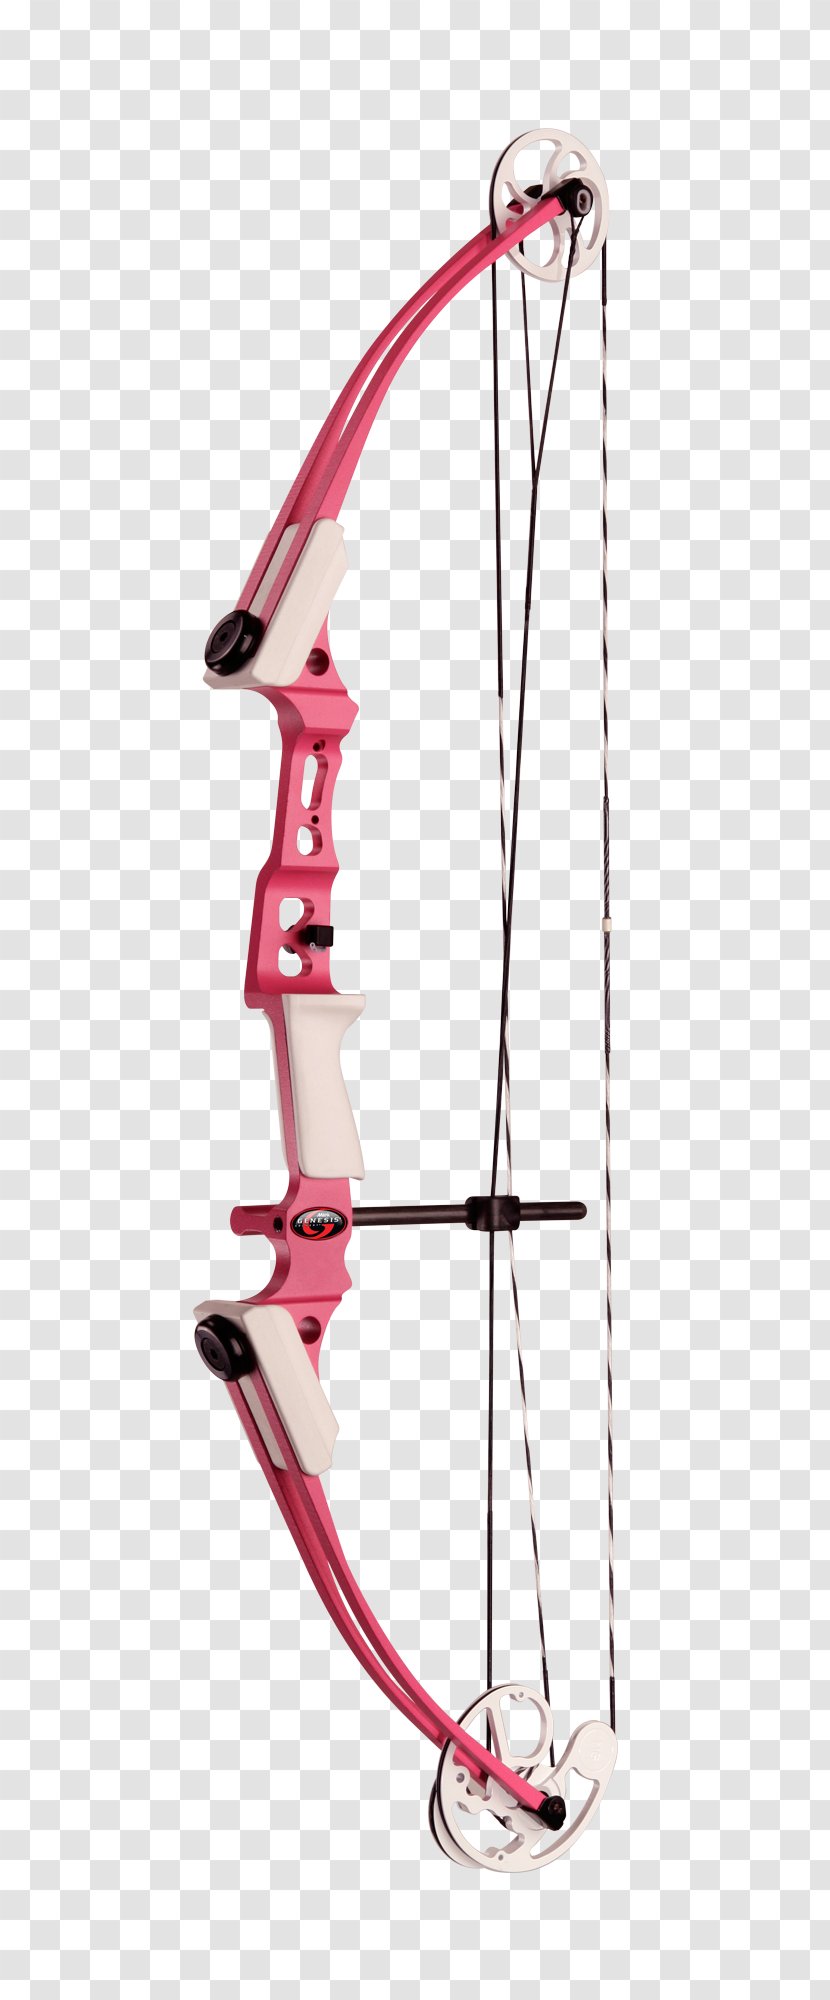 Compound Bows Bow And Arrow Archery Hunting - Sports Equipment Transparent PNG